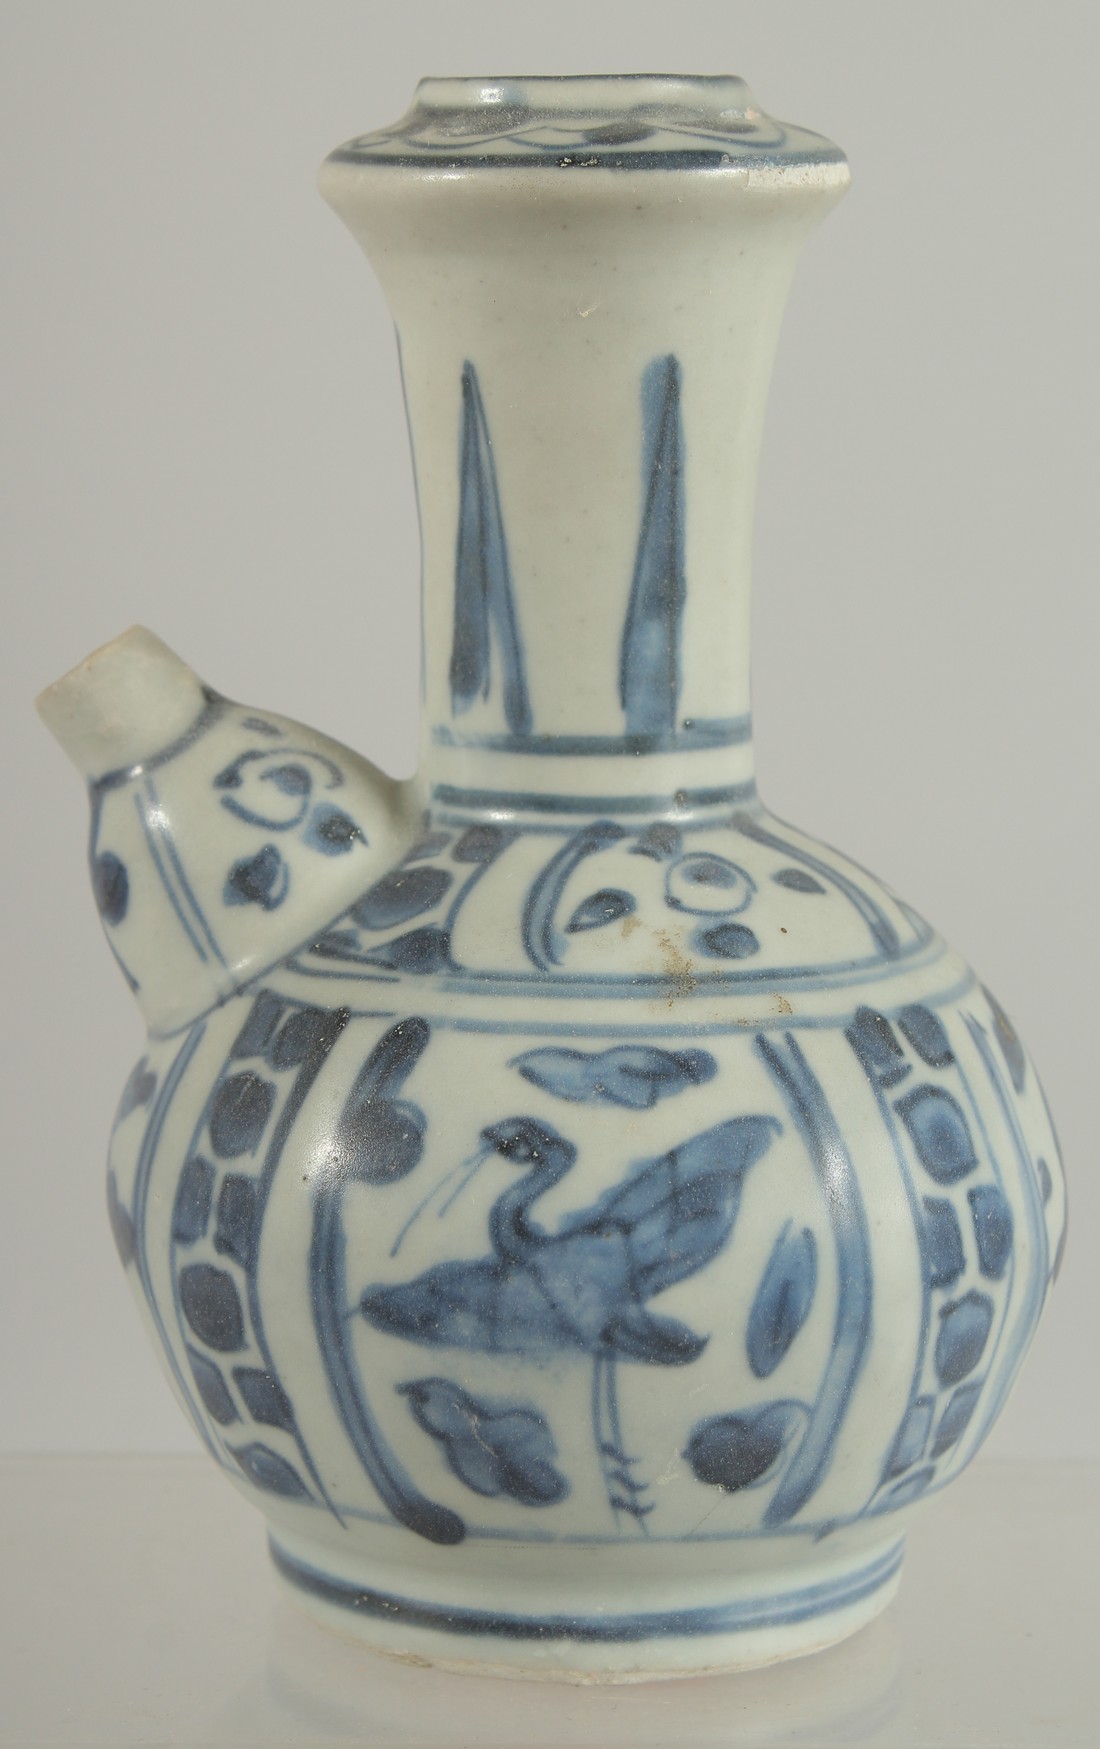 A SMALL 18TH CENTURY NANKING CARGO BLUE AND WHITE PORCELAIN KENDI, with panels of birds, 13.5cm